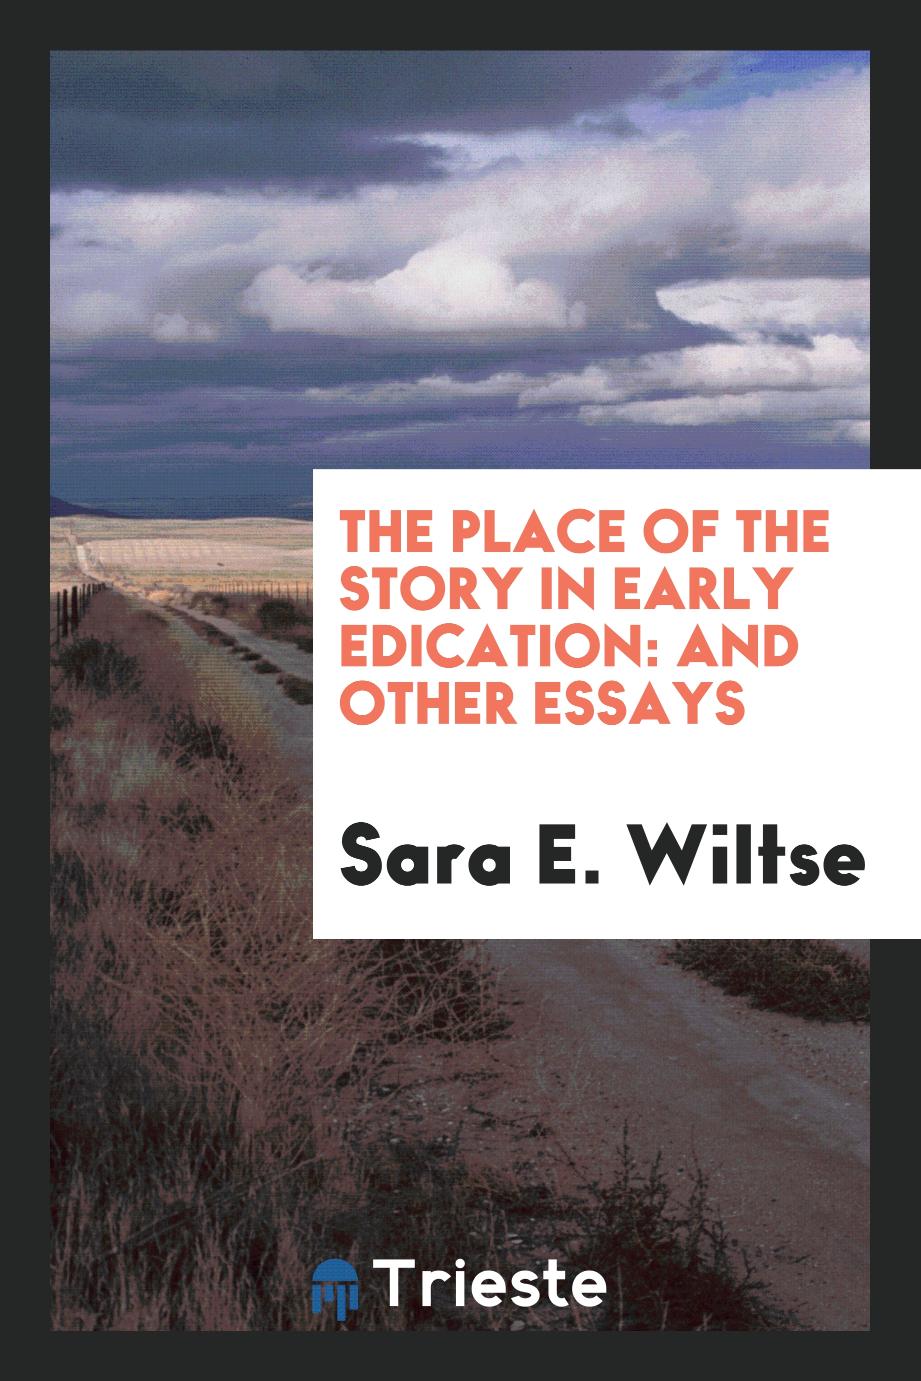 The Place of the Story in Early Edication: And Other Essays